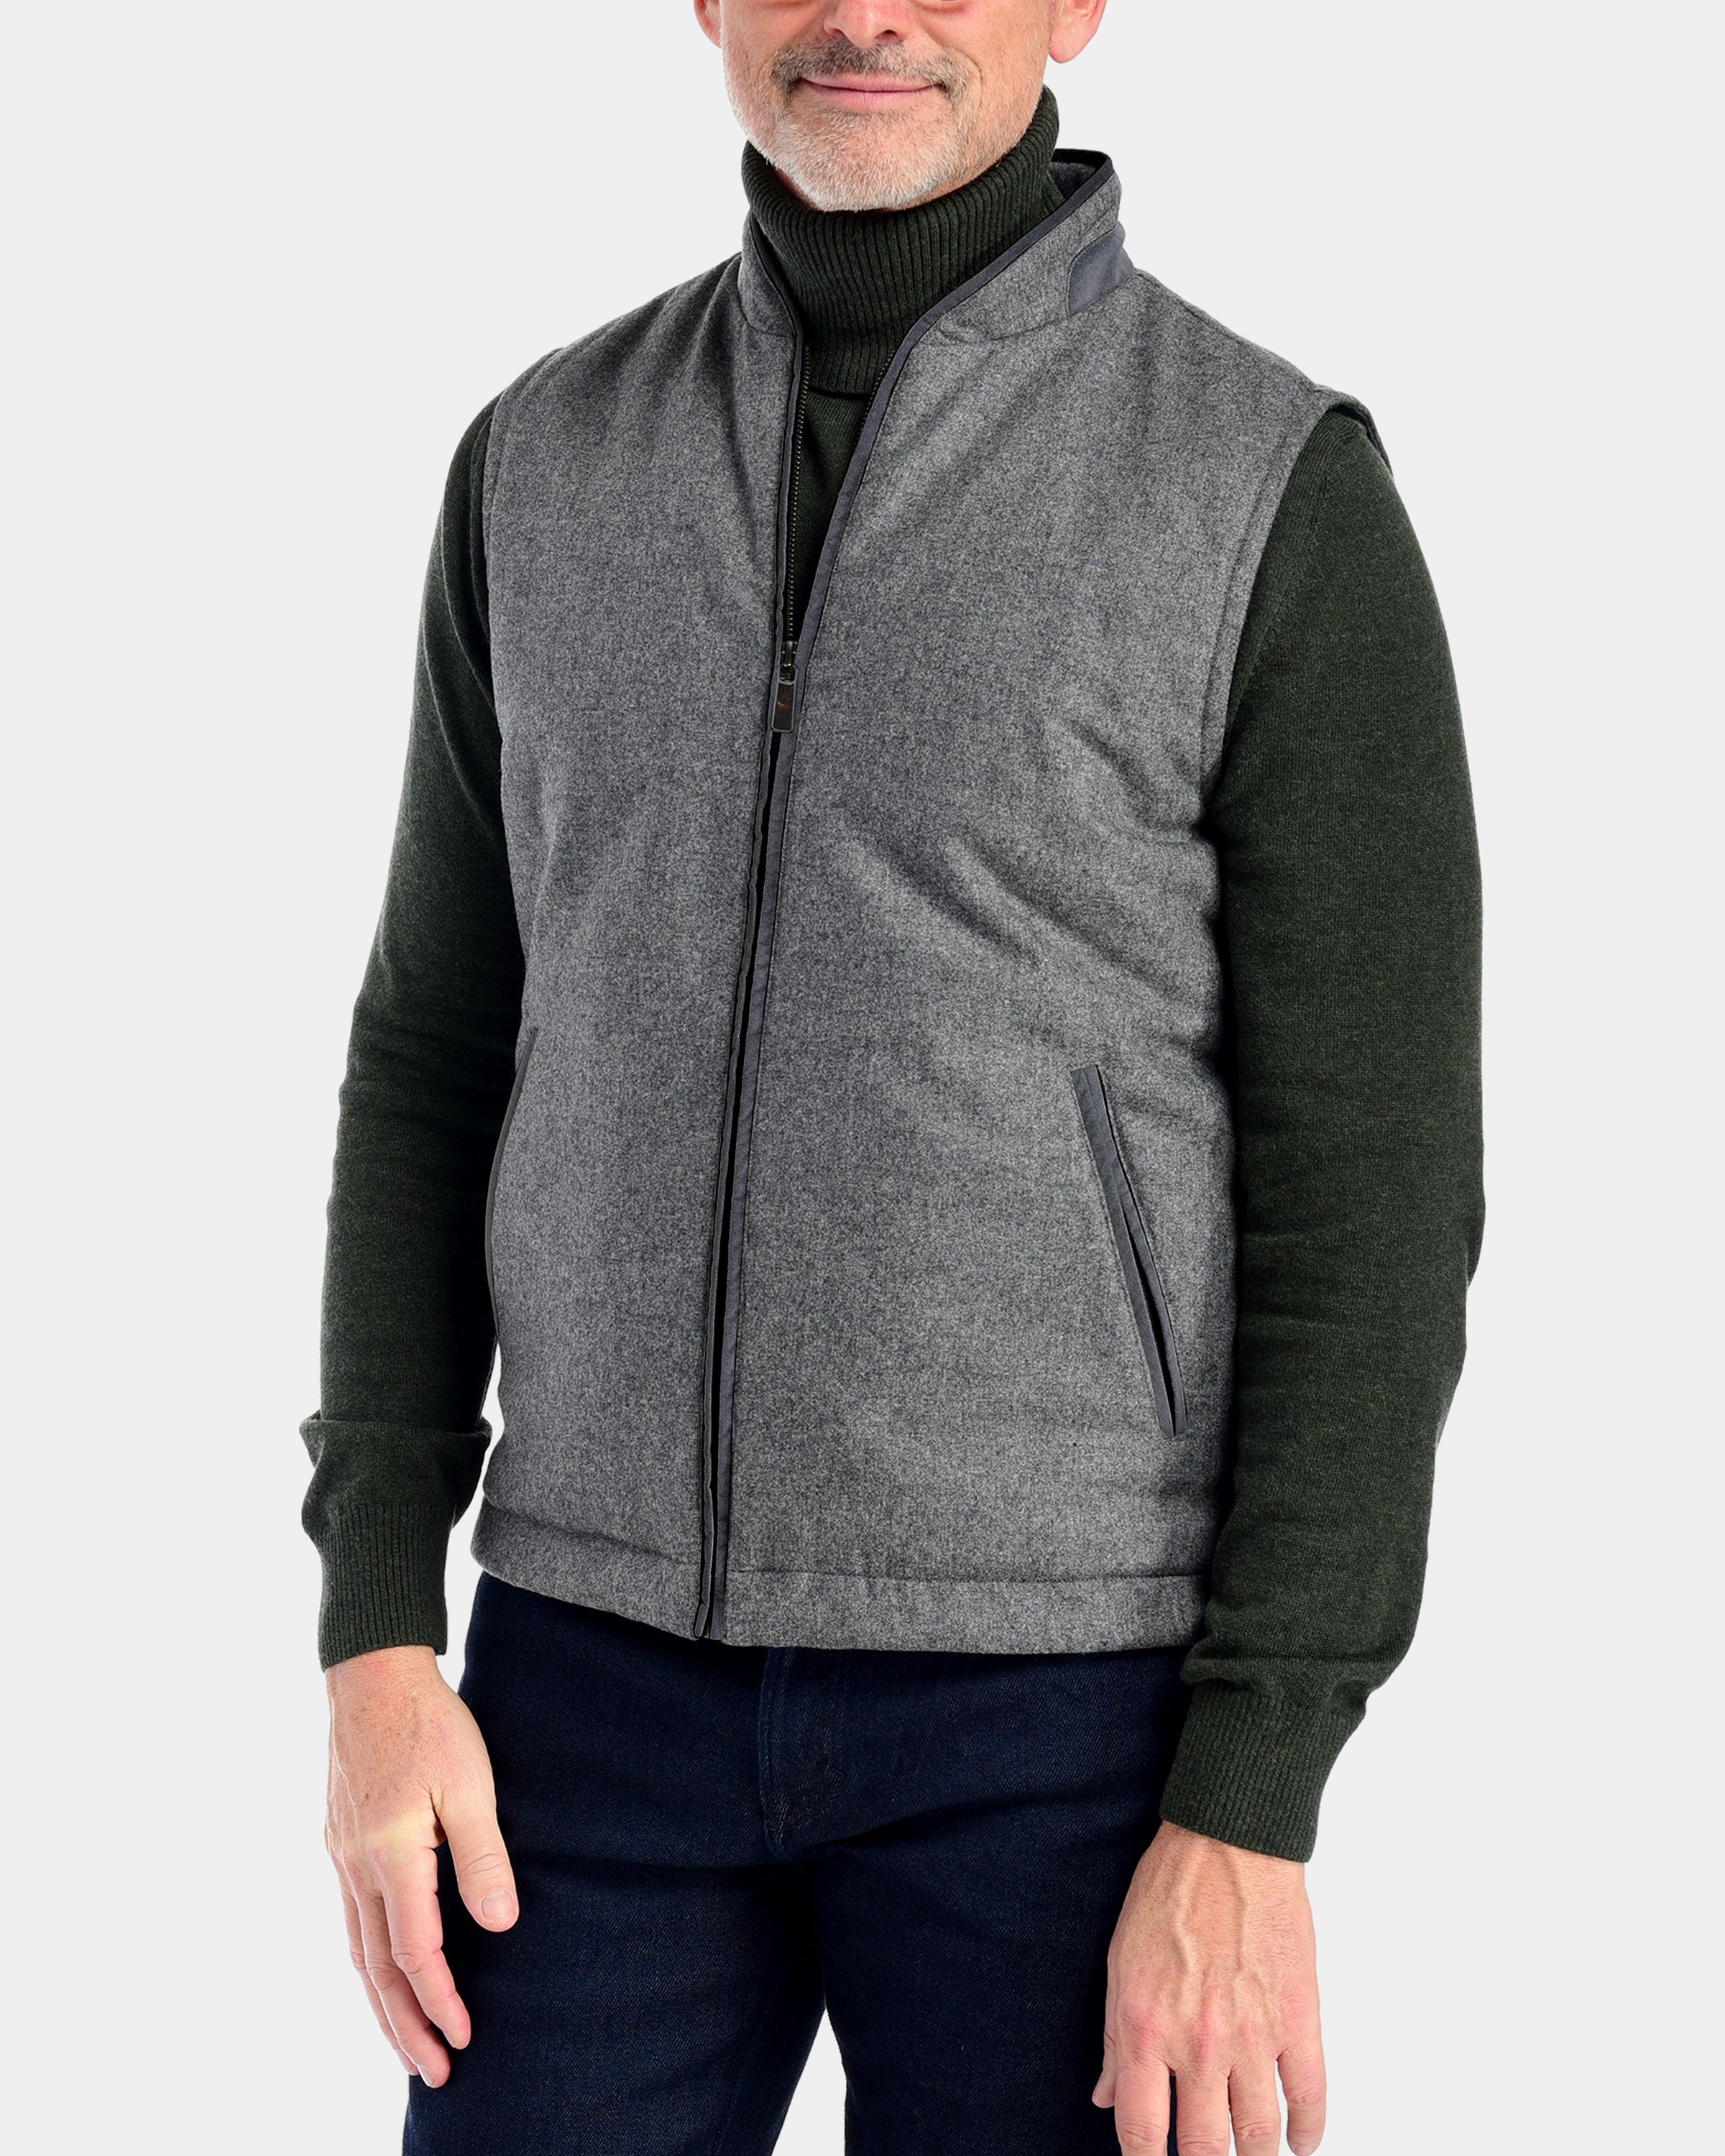 Men's Insulated and Lined Vest the Jameson Vest by Fisher + Baker